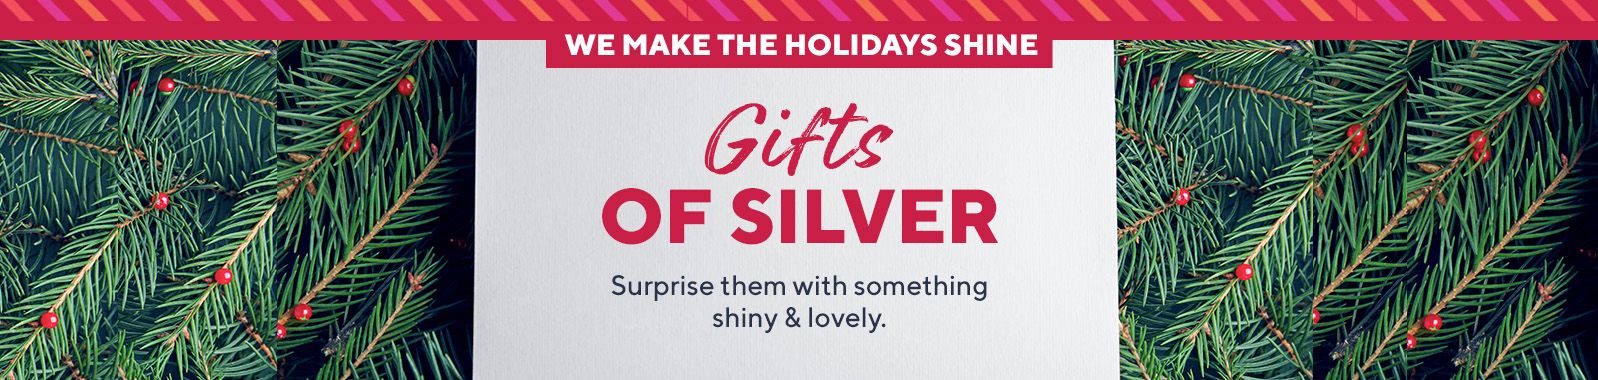 We Make The Holidays Shine  Gifts of Silver  Surprise them with something shiny & lovely.